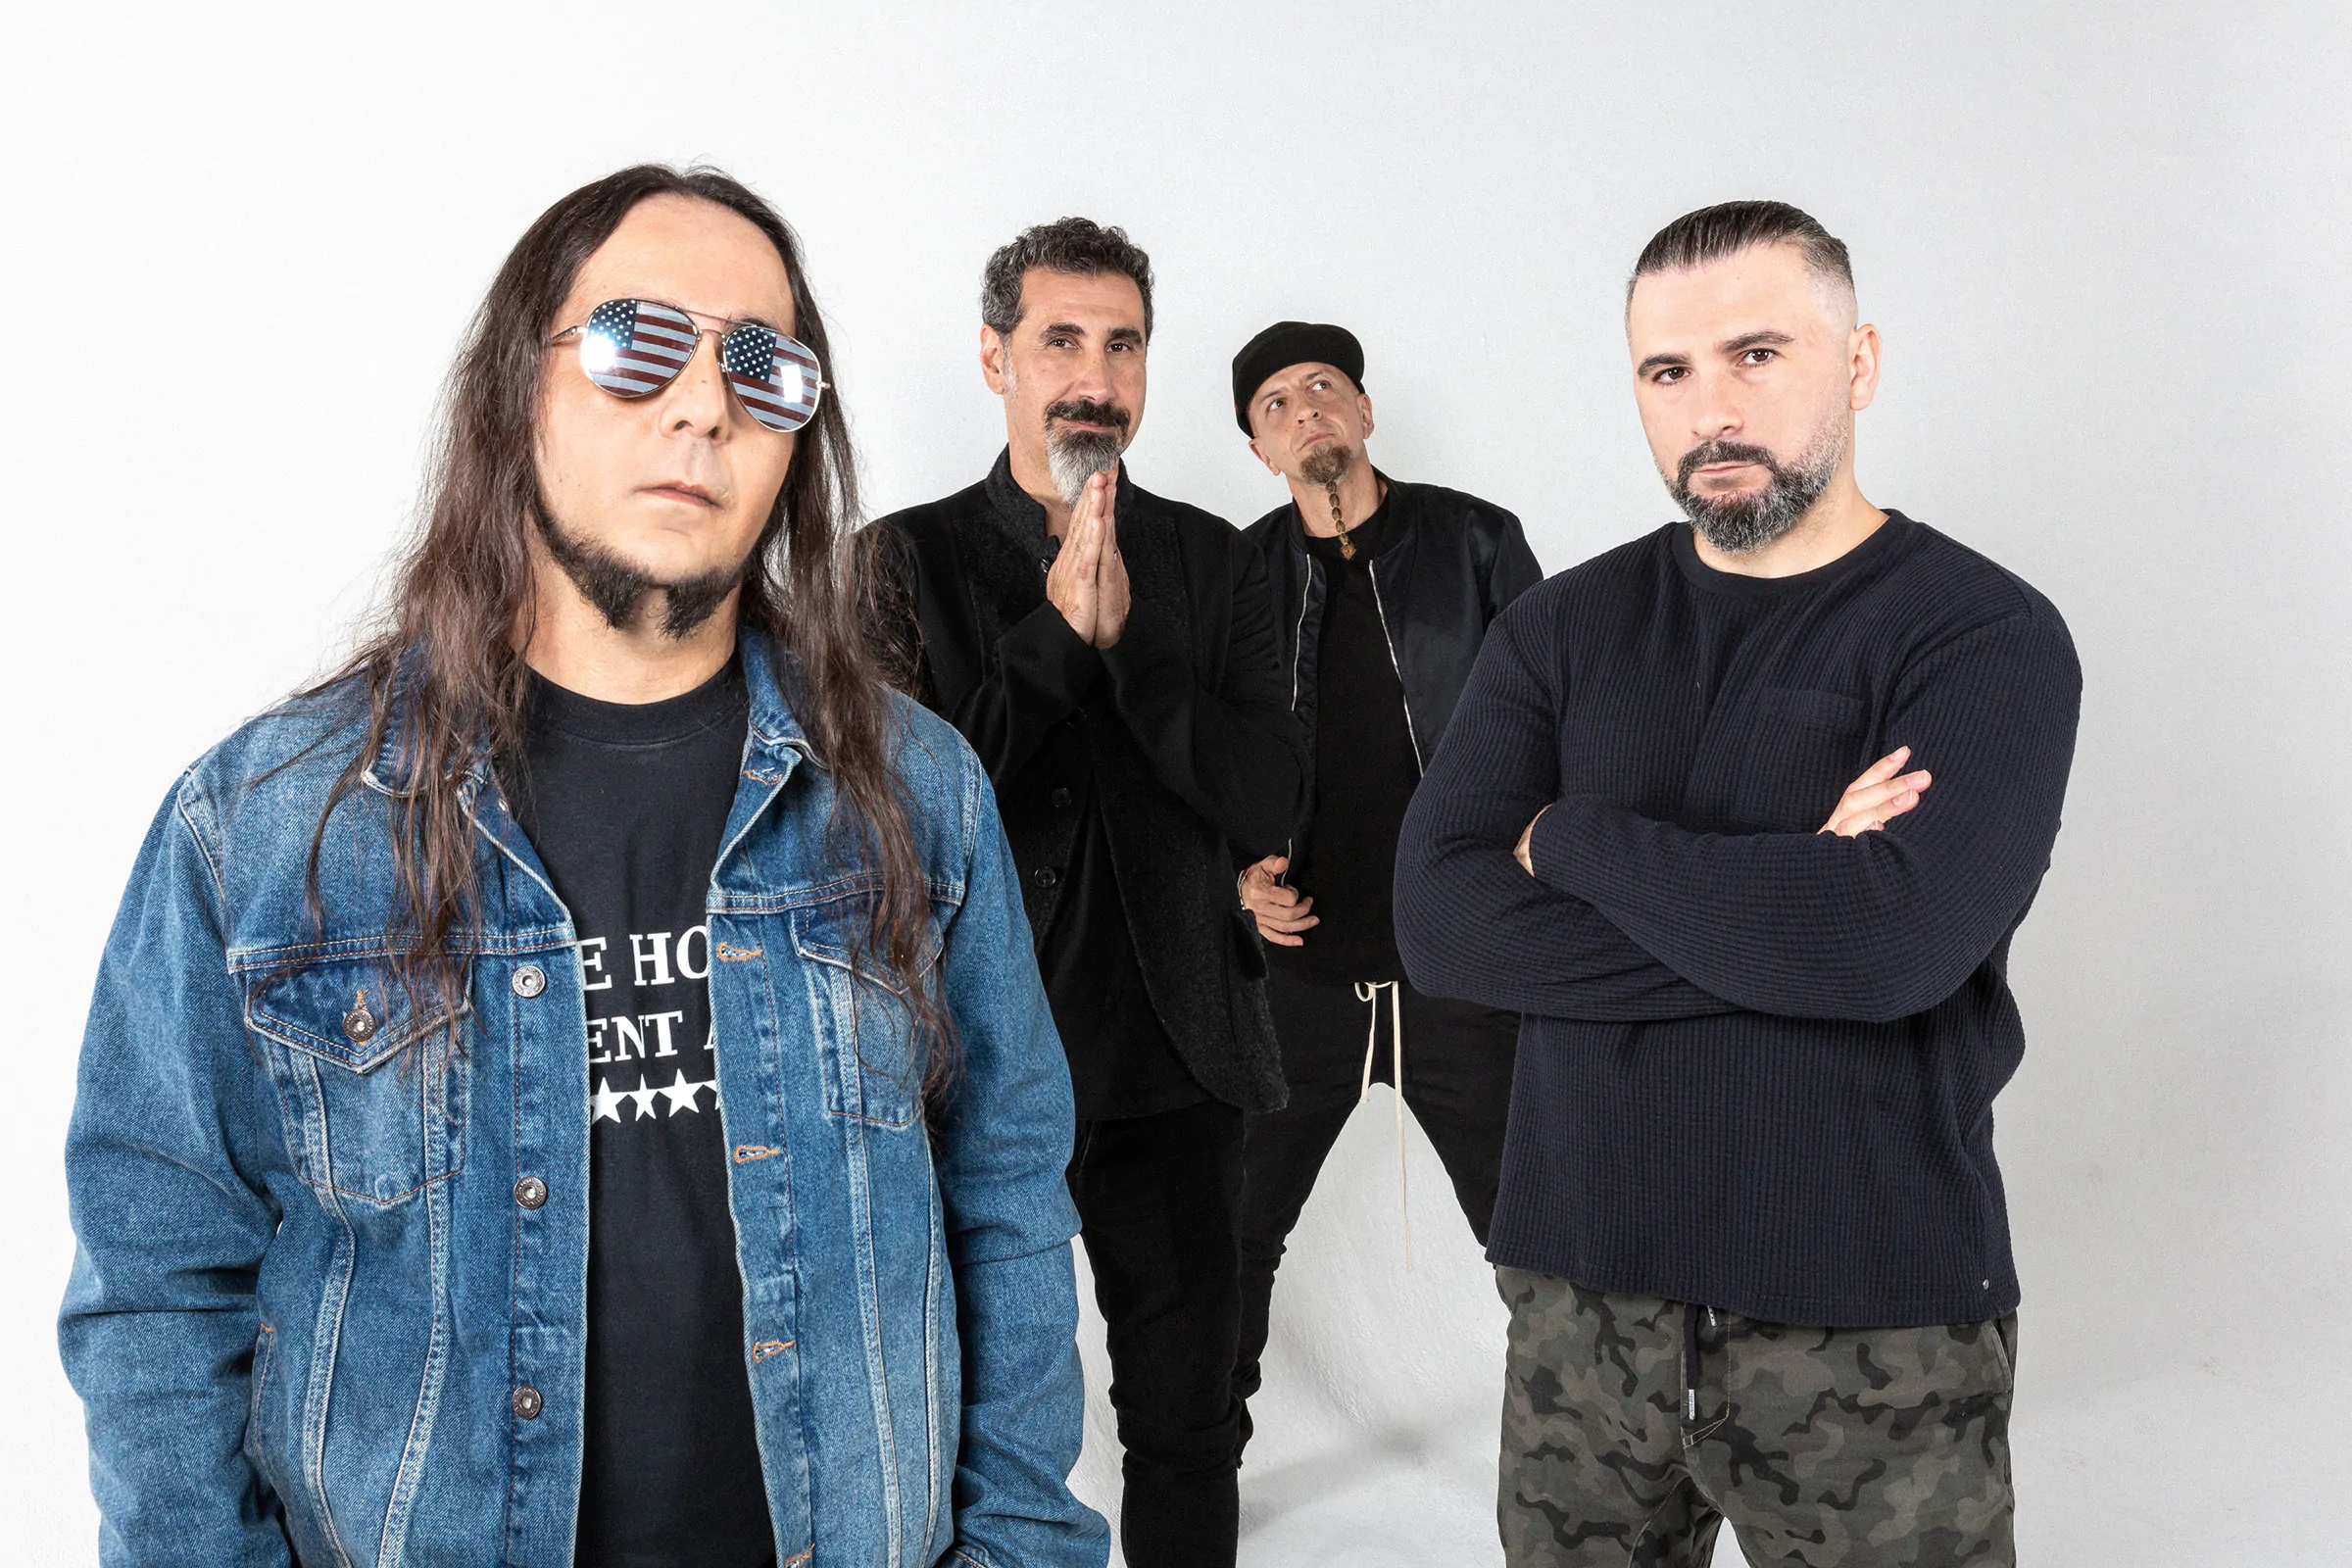 SYSTEM OF A DOWN share first new music in 15 years – Listen to ‘Protect The Land’ & ‘Genocidal Humanoidz’ Now!